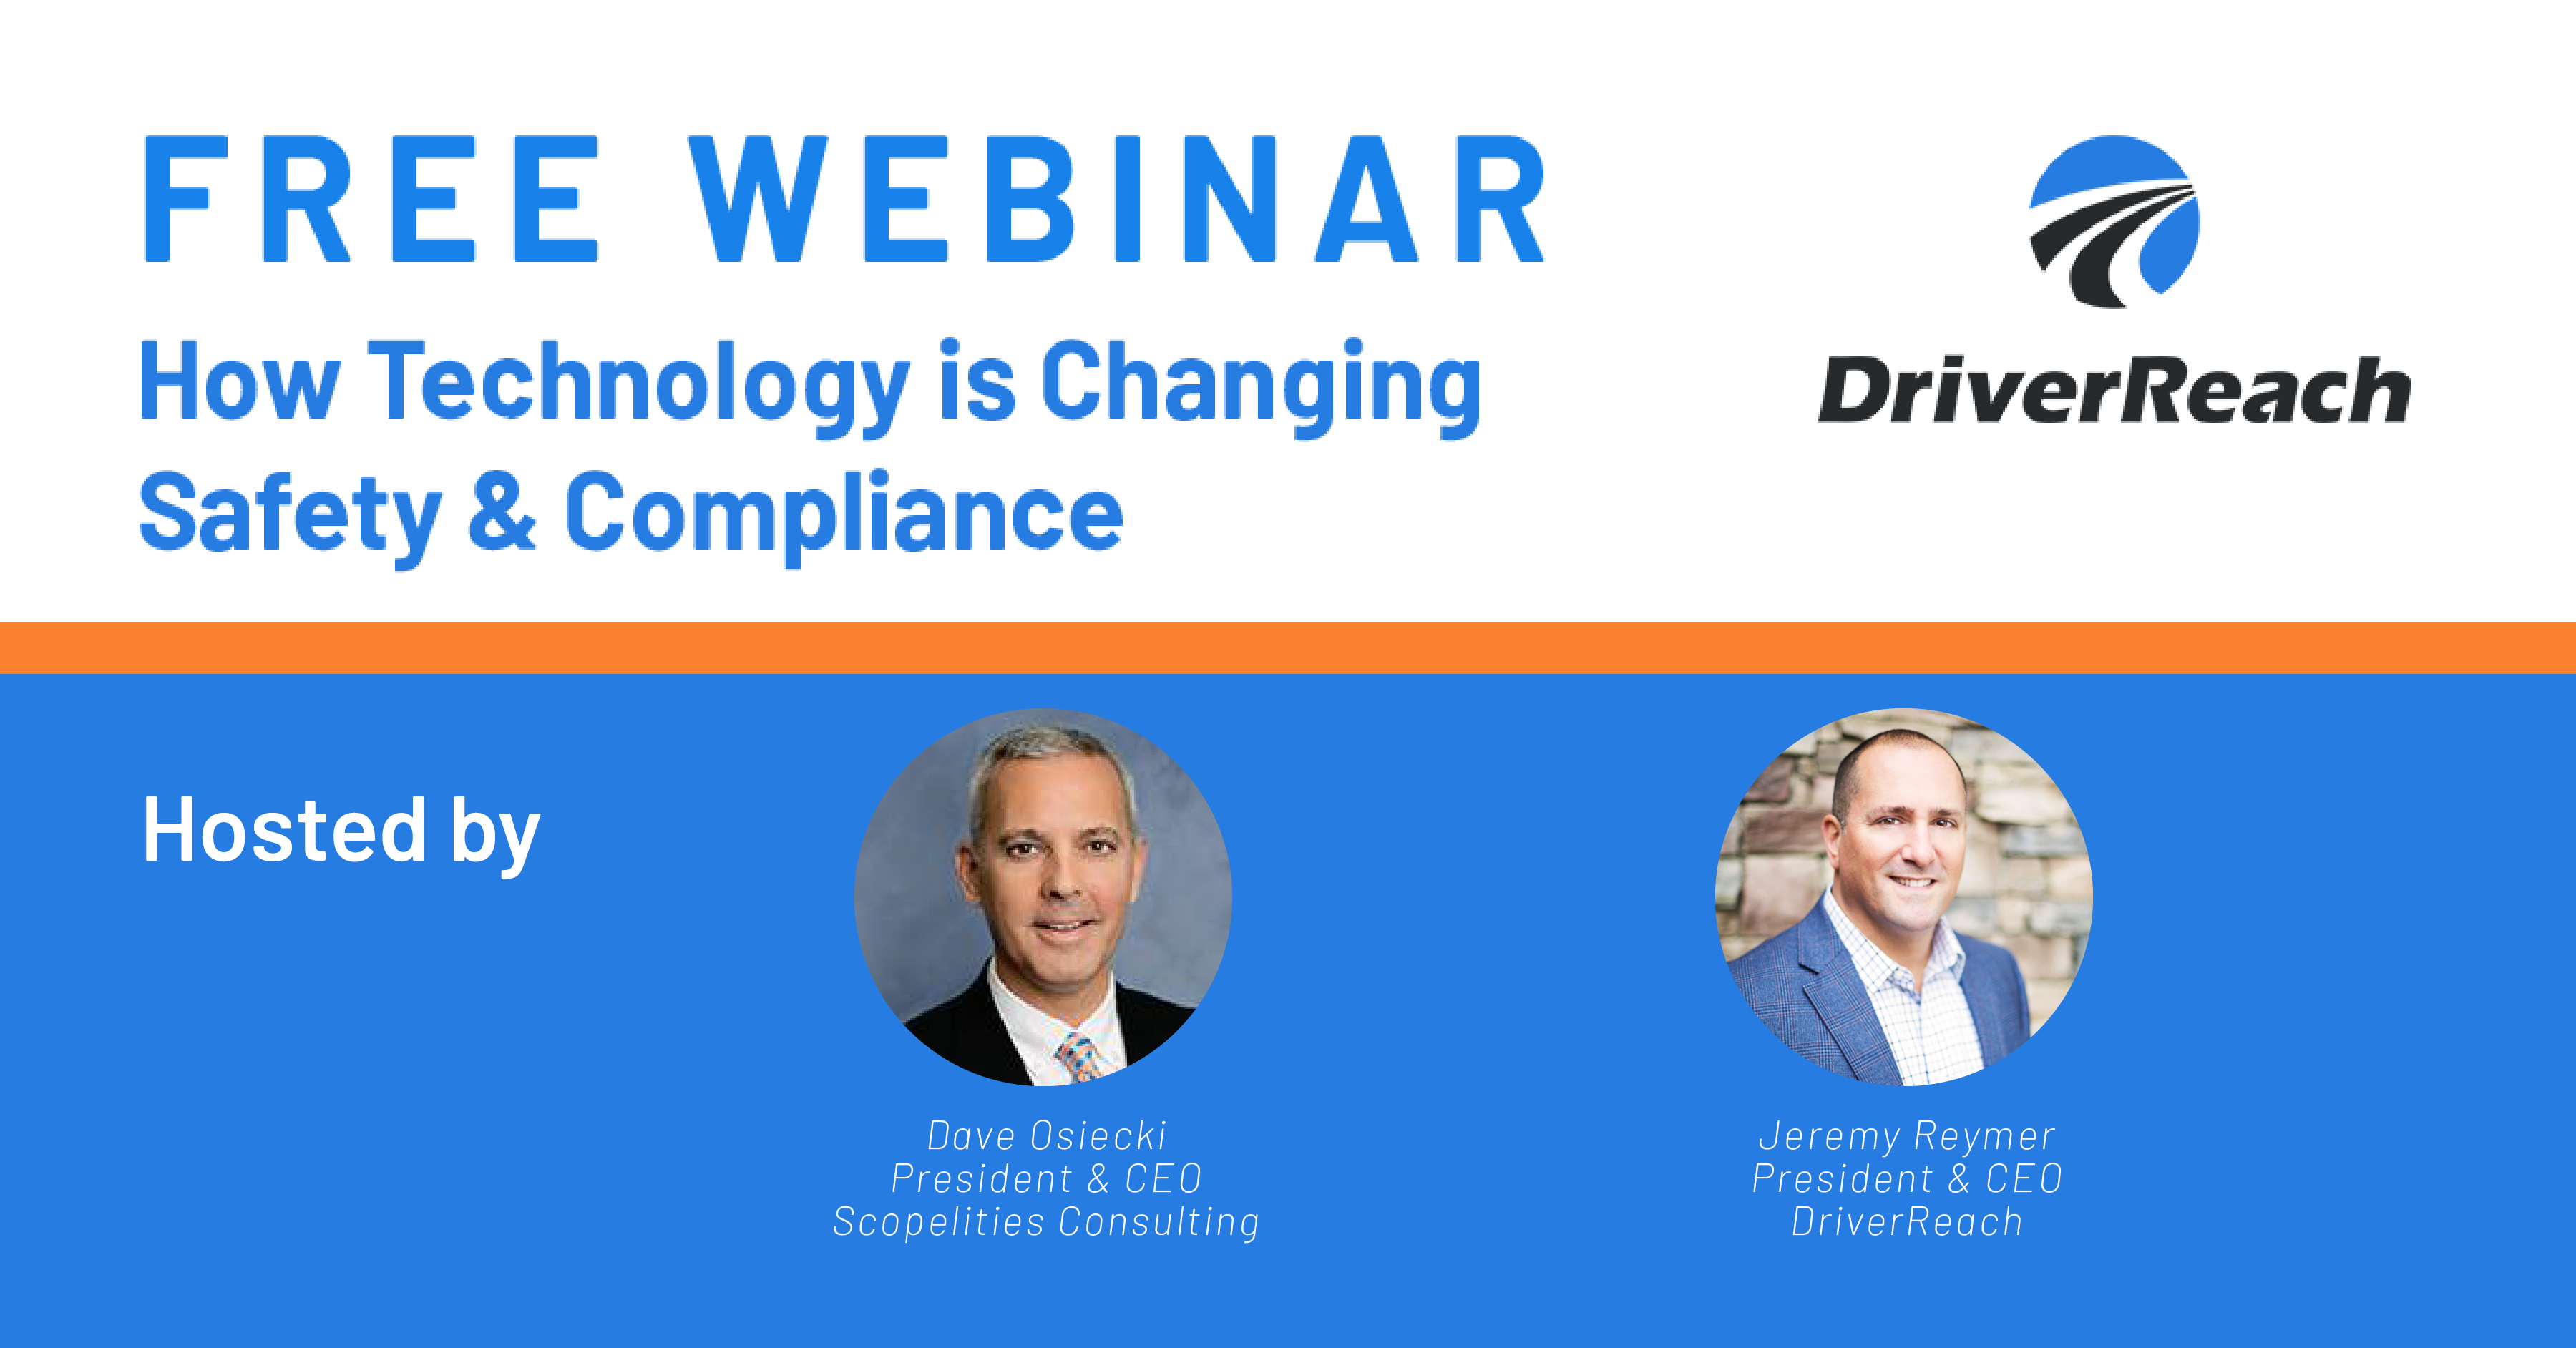 WEBINAR: How Technology is Changing Safety & Compliance